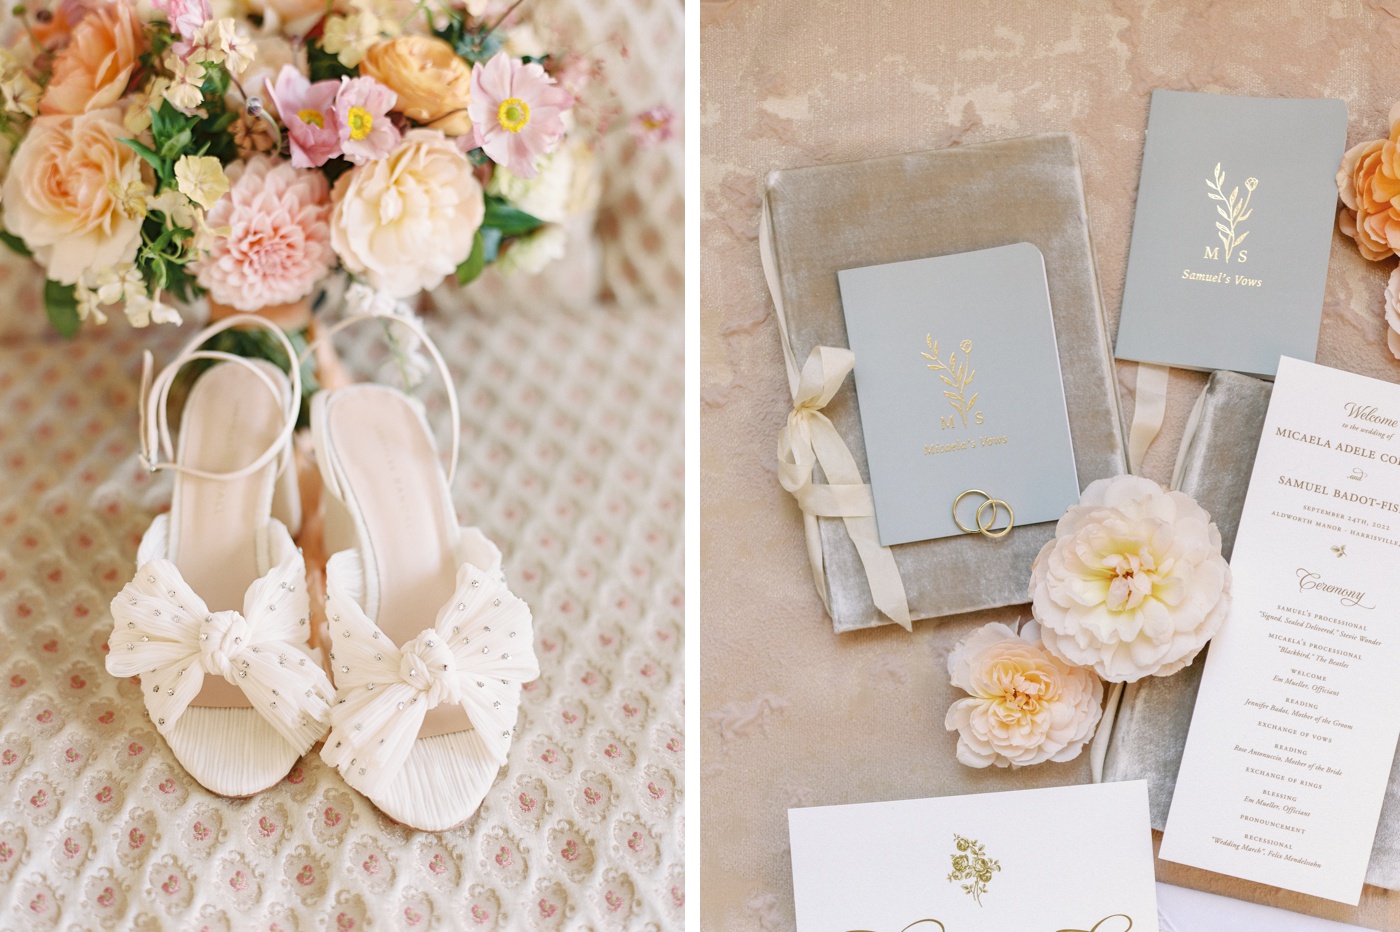 Flatlay of a vow book and wedding ceremony program with pink flowers and wedding rings